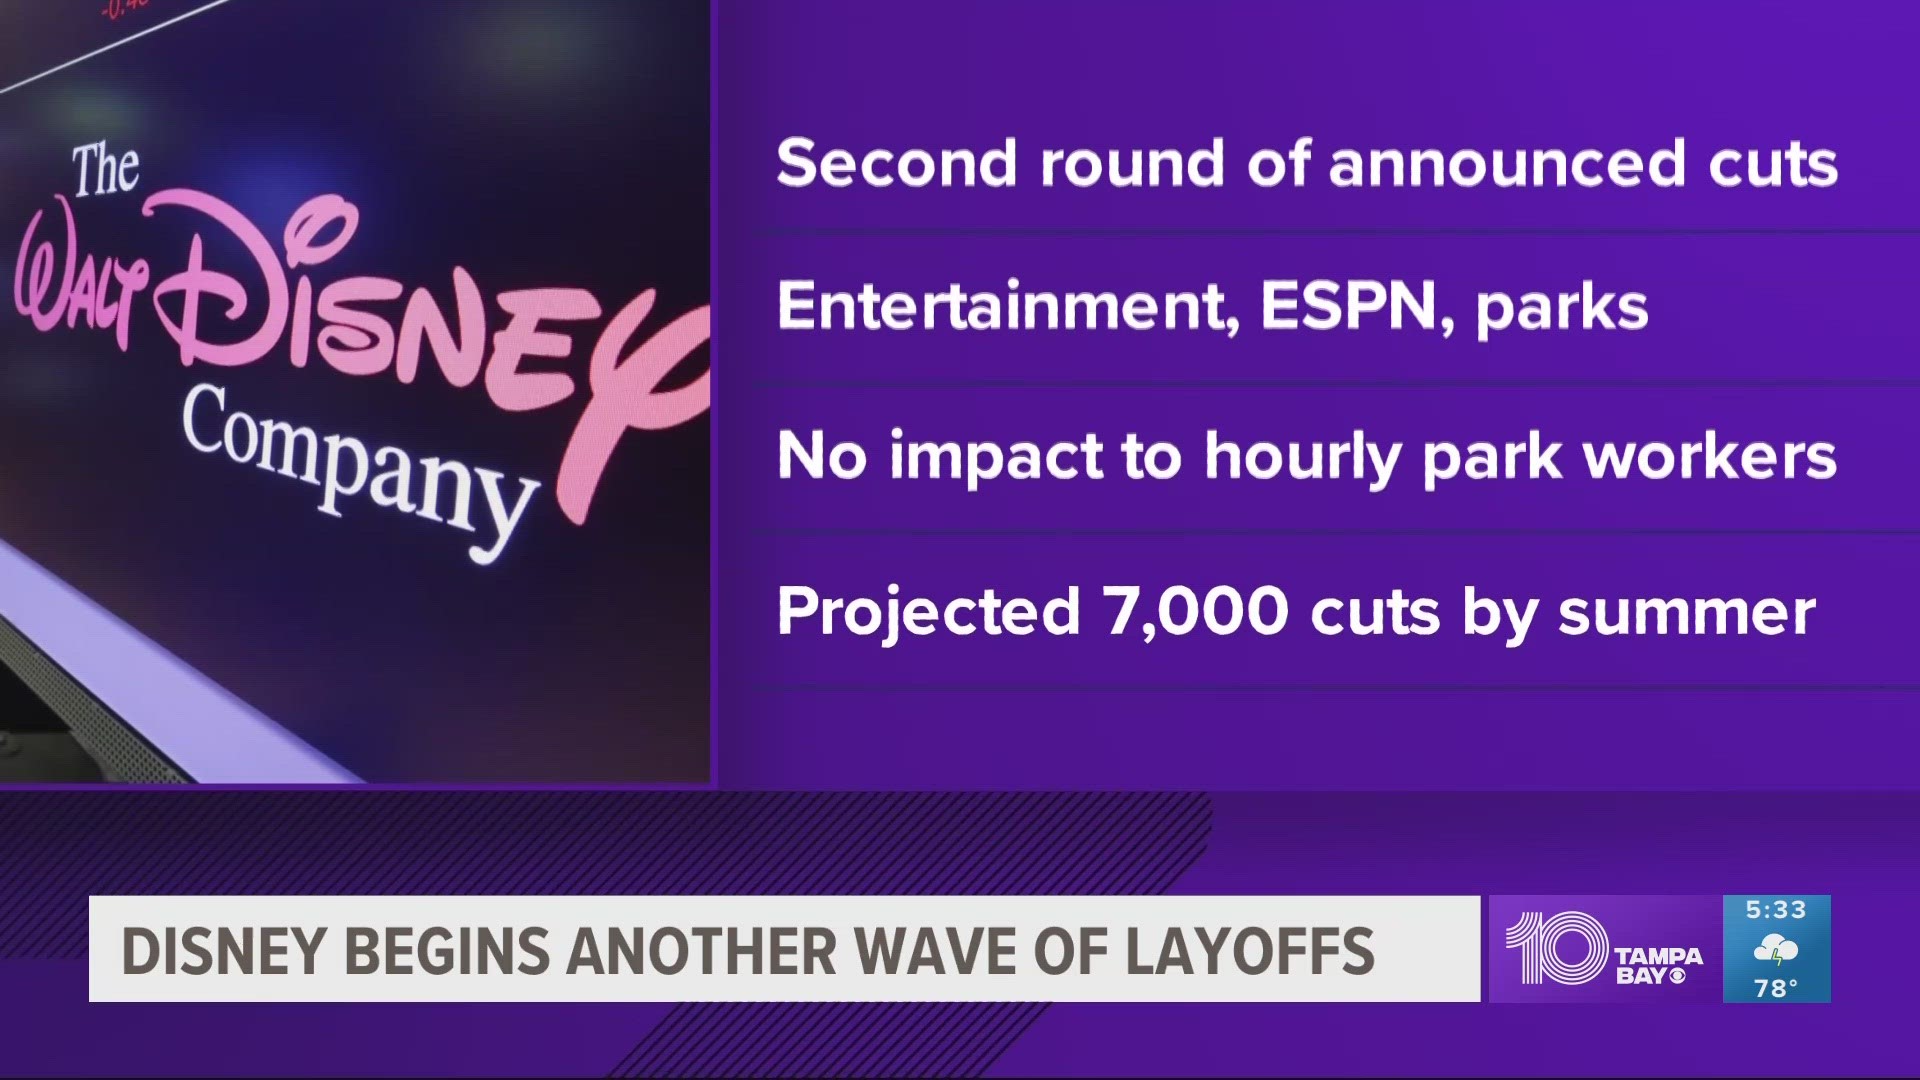 Disney anticipates a third round of layoffs starting before the beginning of the summer in order to hit its goal of cutting 7,000 jobs.